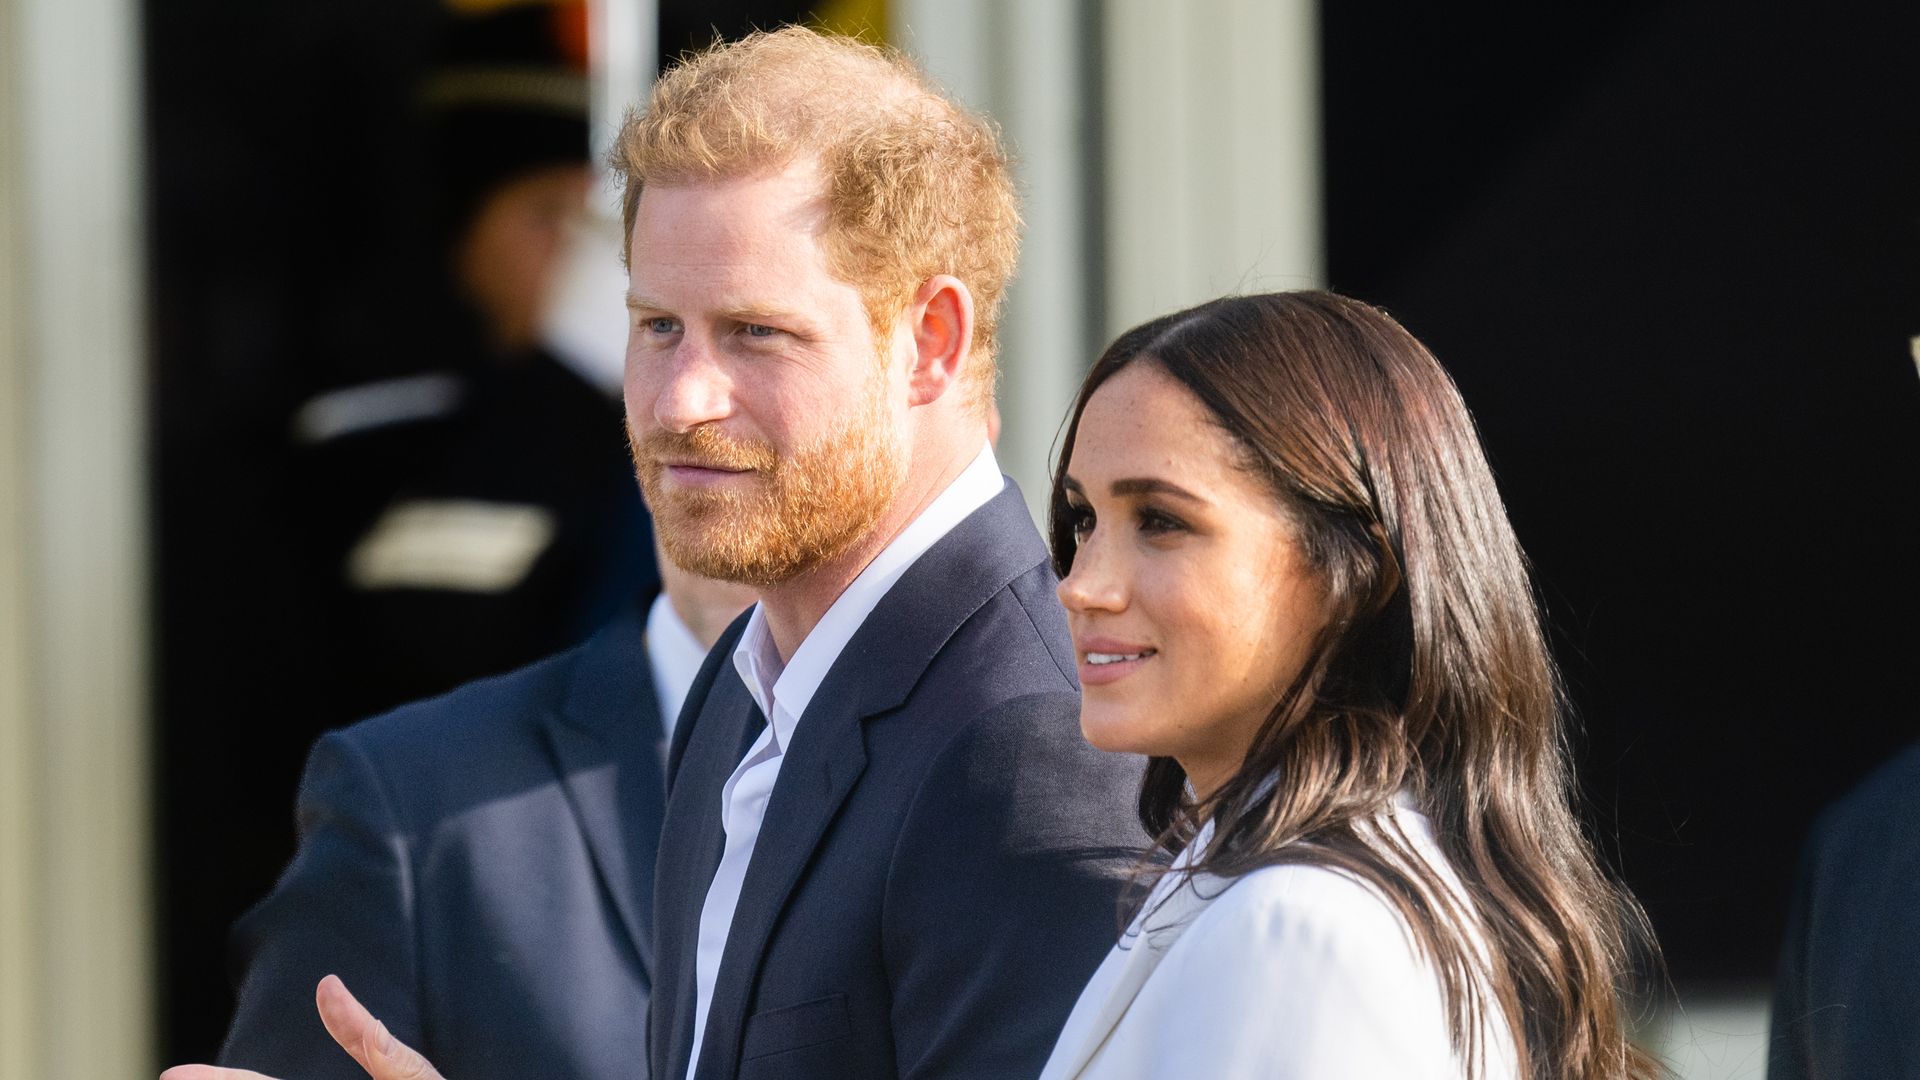 Prince Harry confirms Meghan Markle hasn't joined him on UK trip